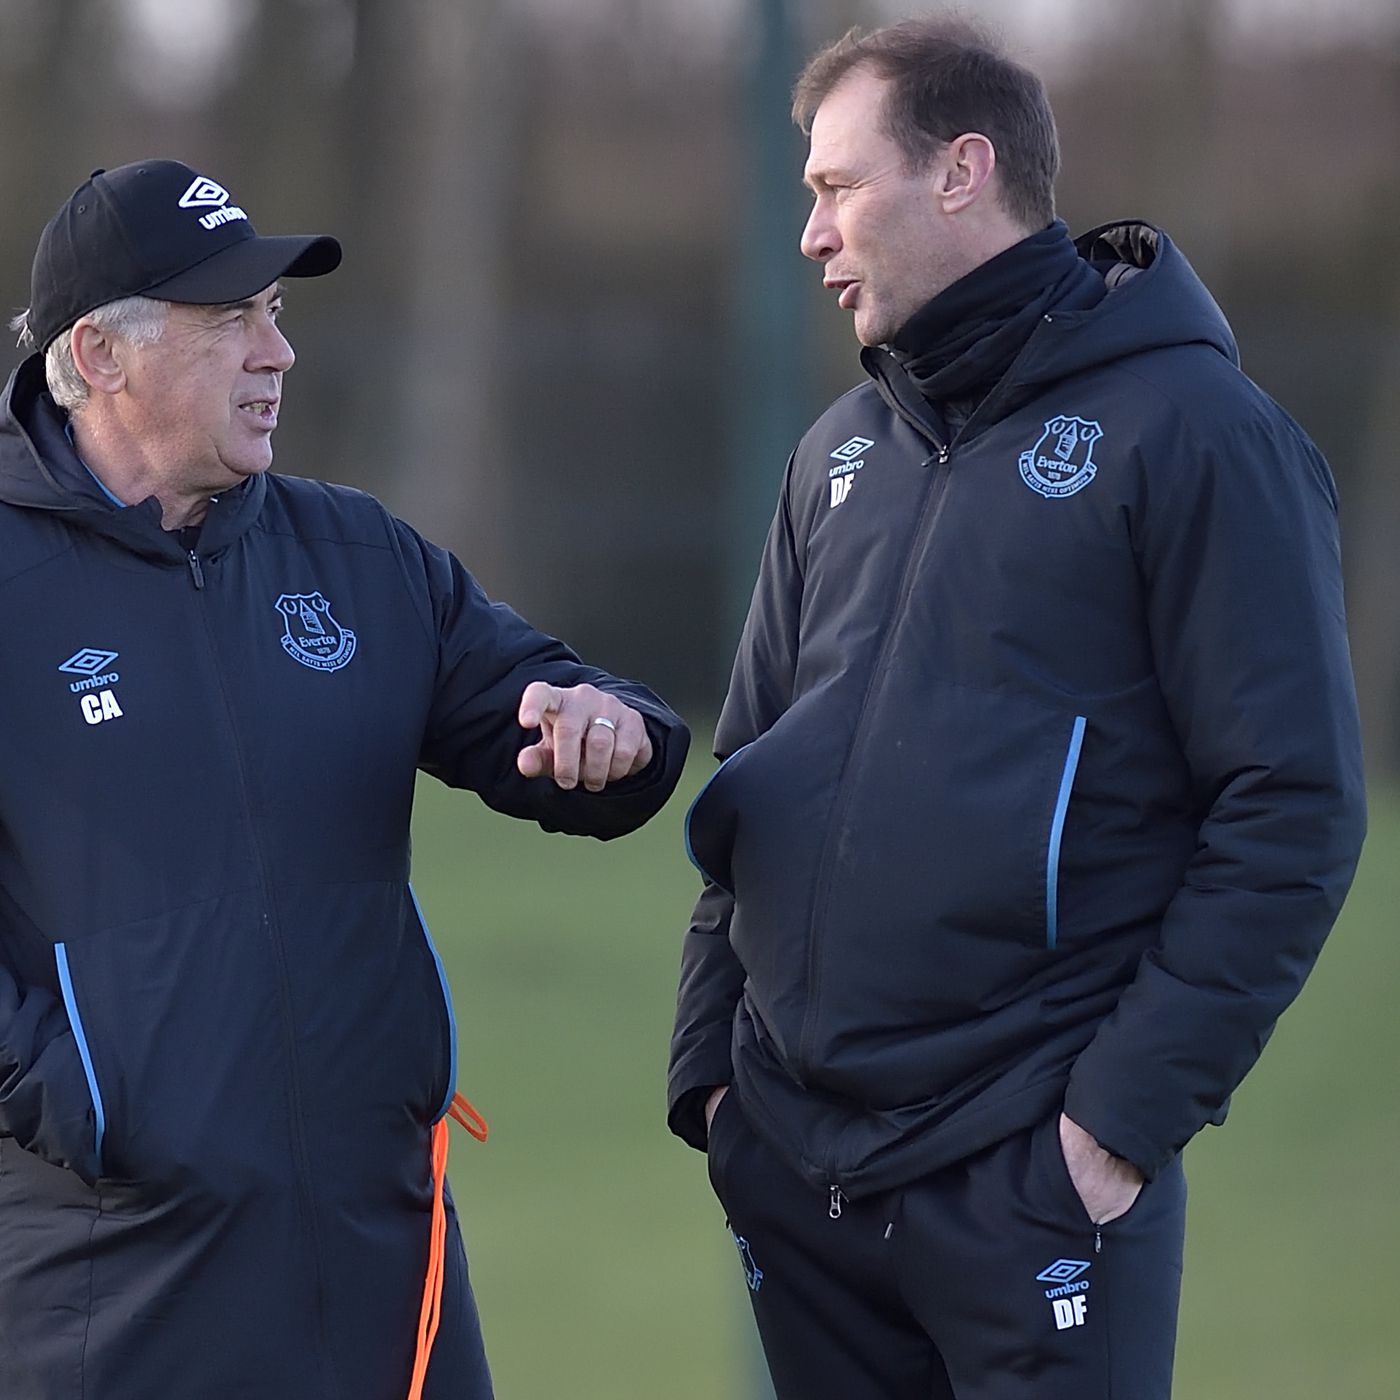 Carlo Ancelotti gets his first Everton call right by promoting Duncan Ferguson - Royal Blue Mersey